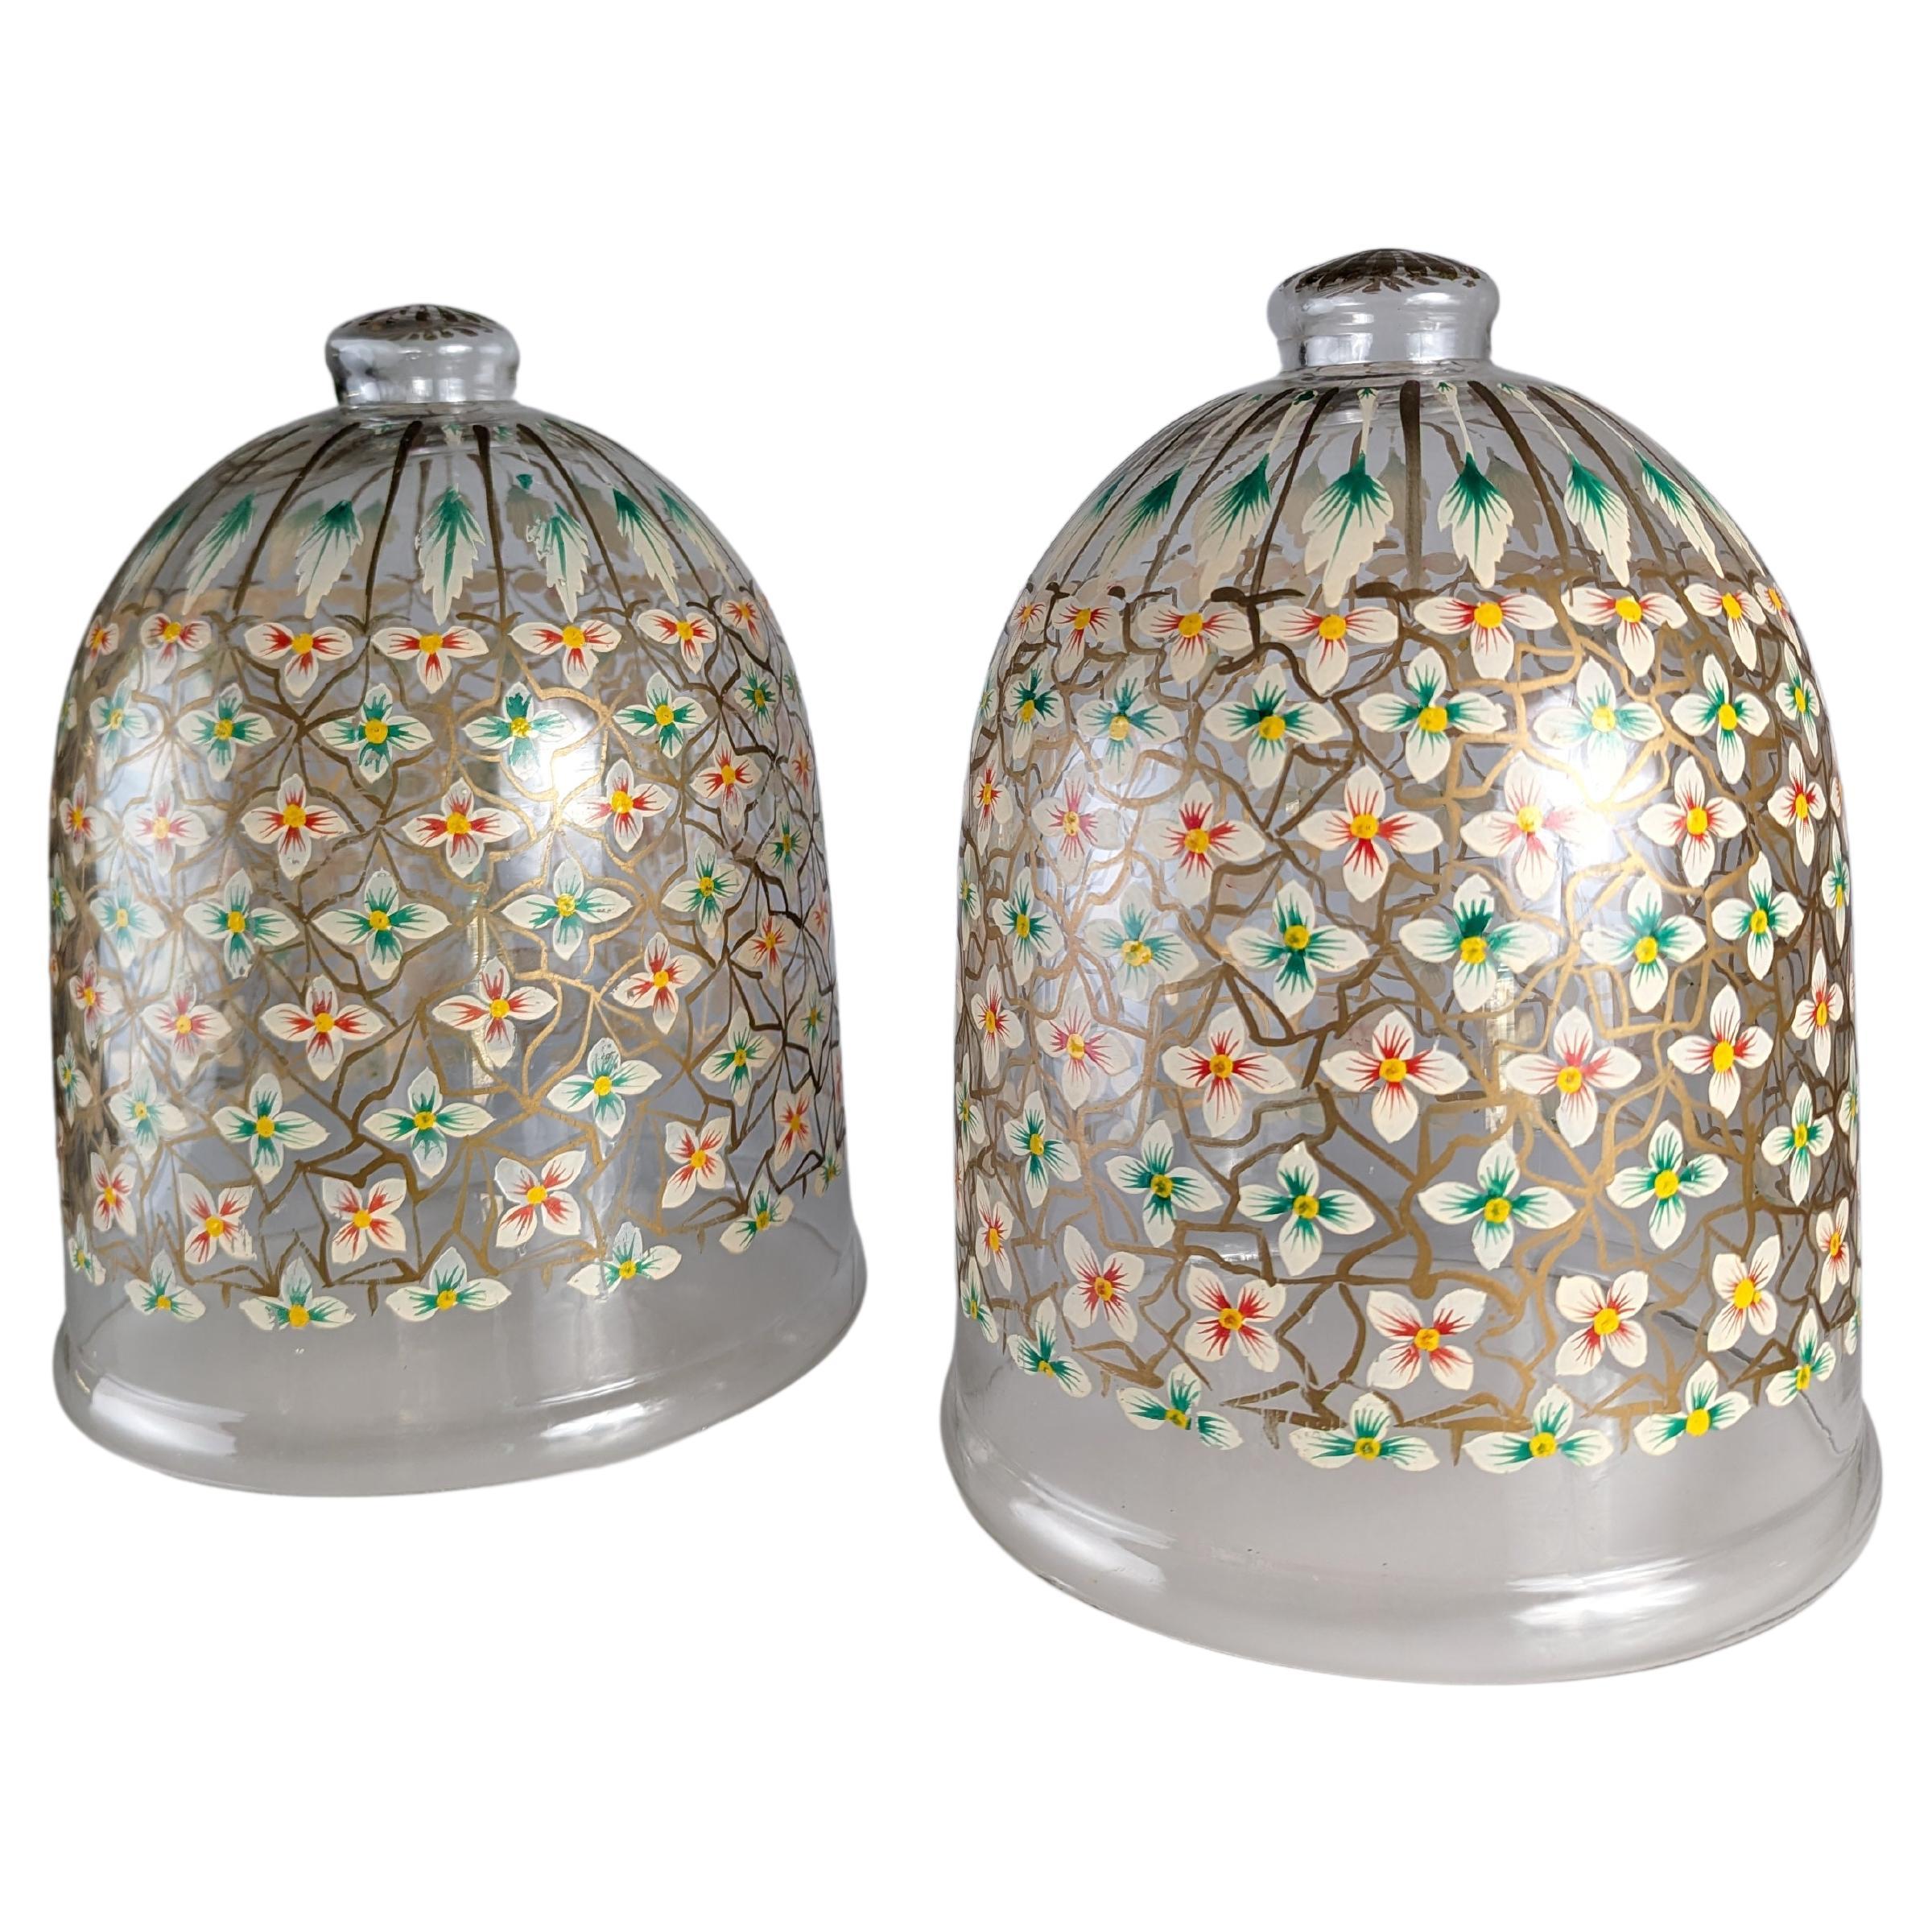 Pair of hand-painted floral glass lanterns For Sale